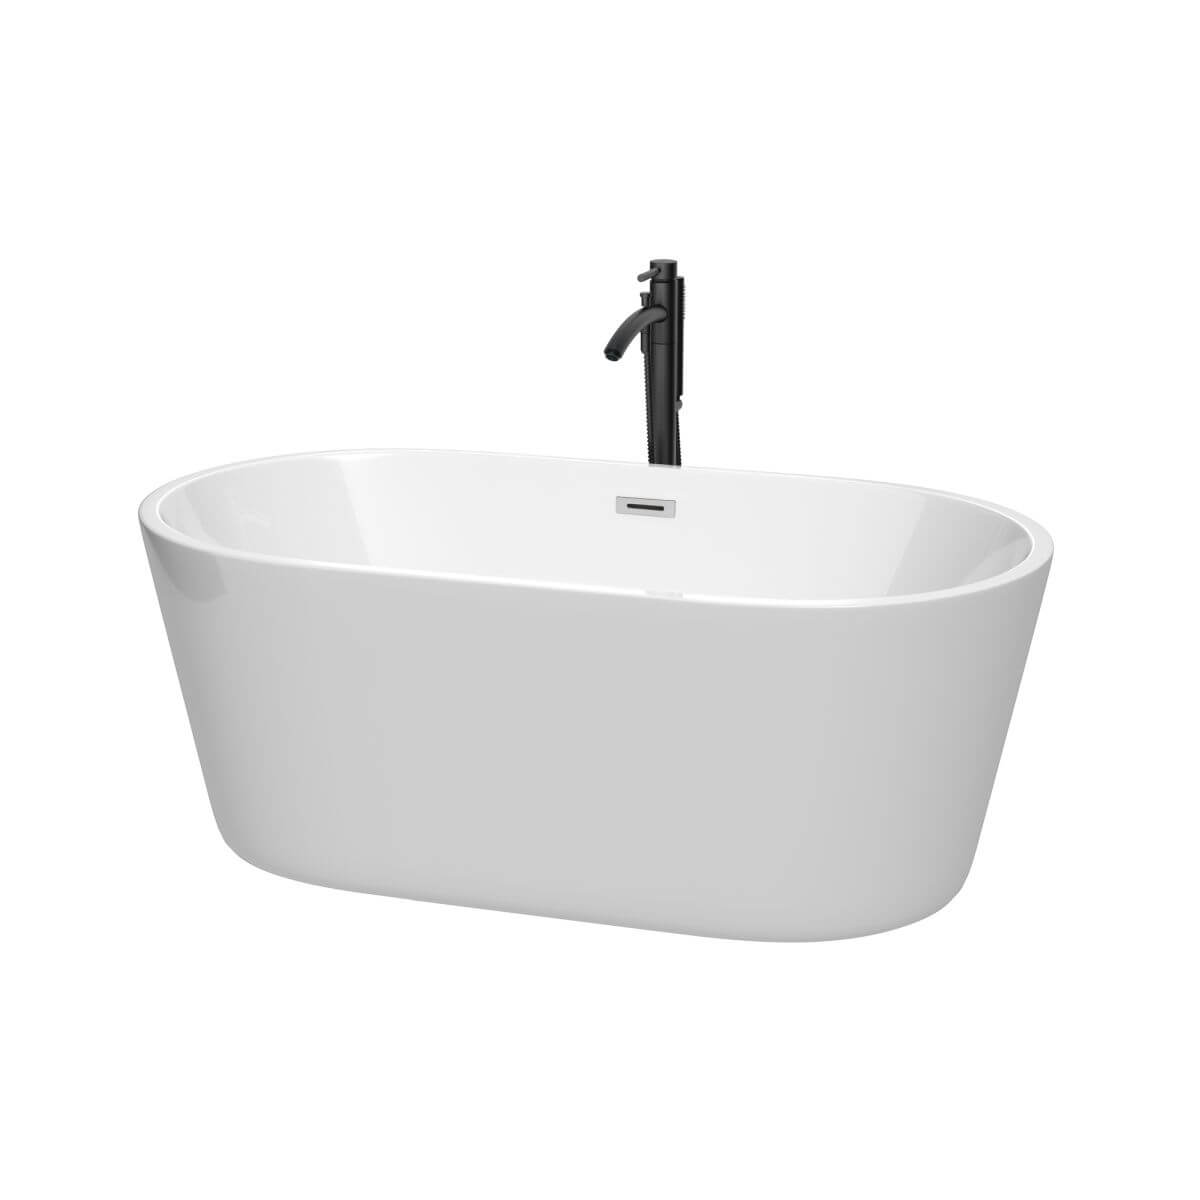 Wyndham Collection Carissa 60 inch Freestanding Bathtub in White with Polished Chrome Trim and Floor Mounted Faucet in Matte Black - WCOBT101260PCATPBK